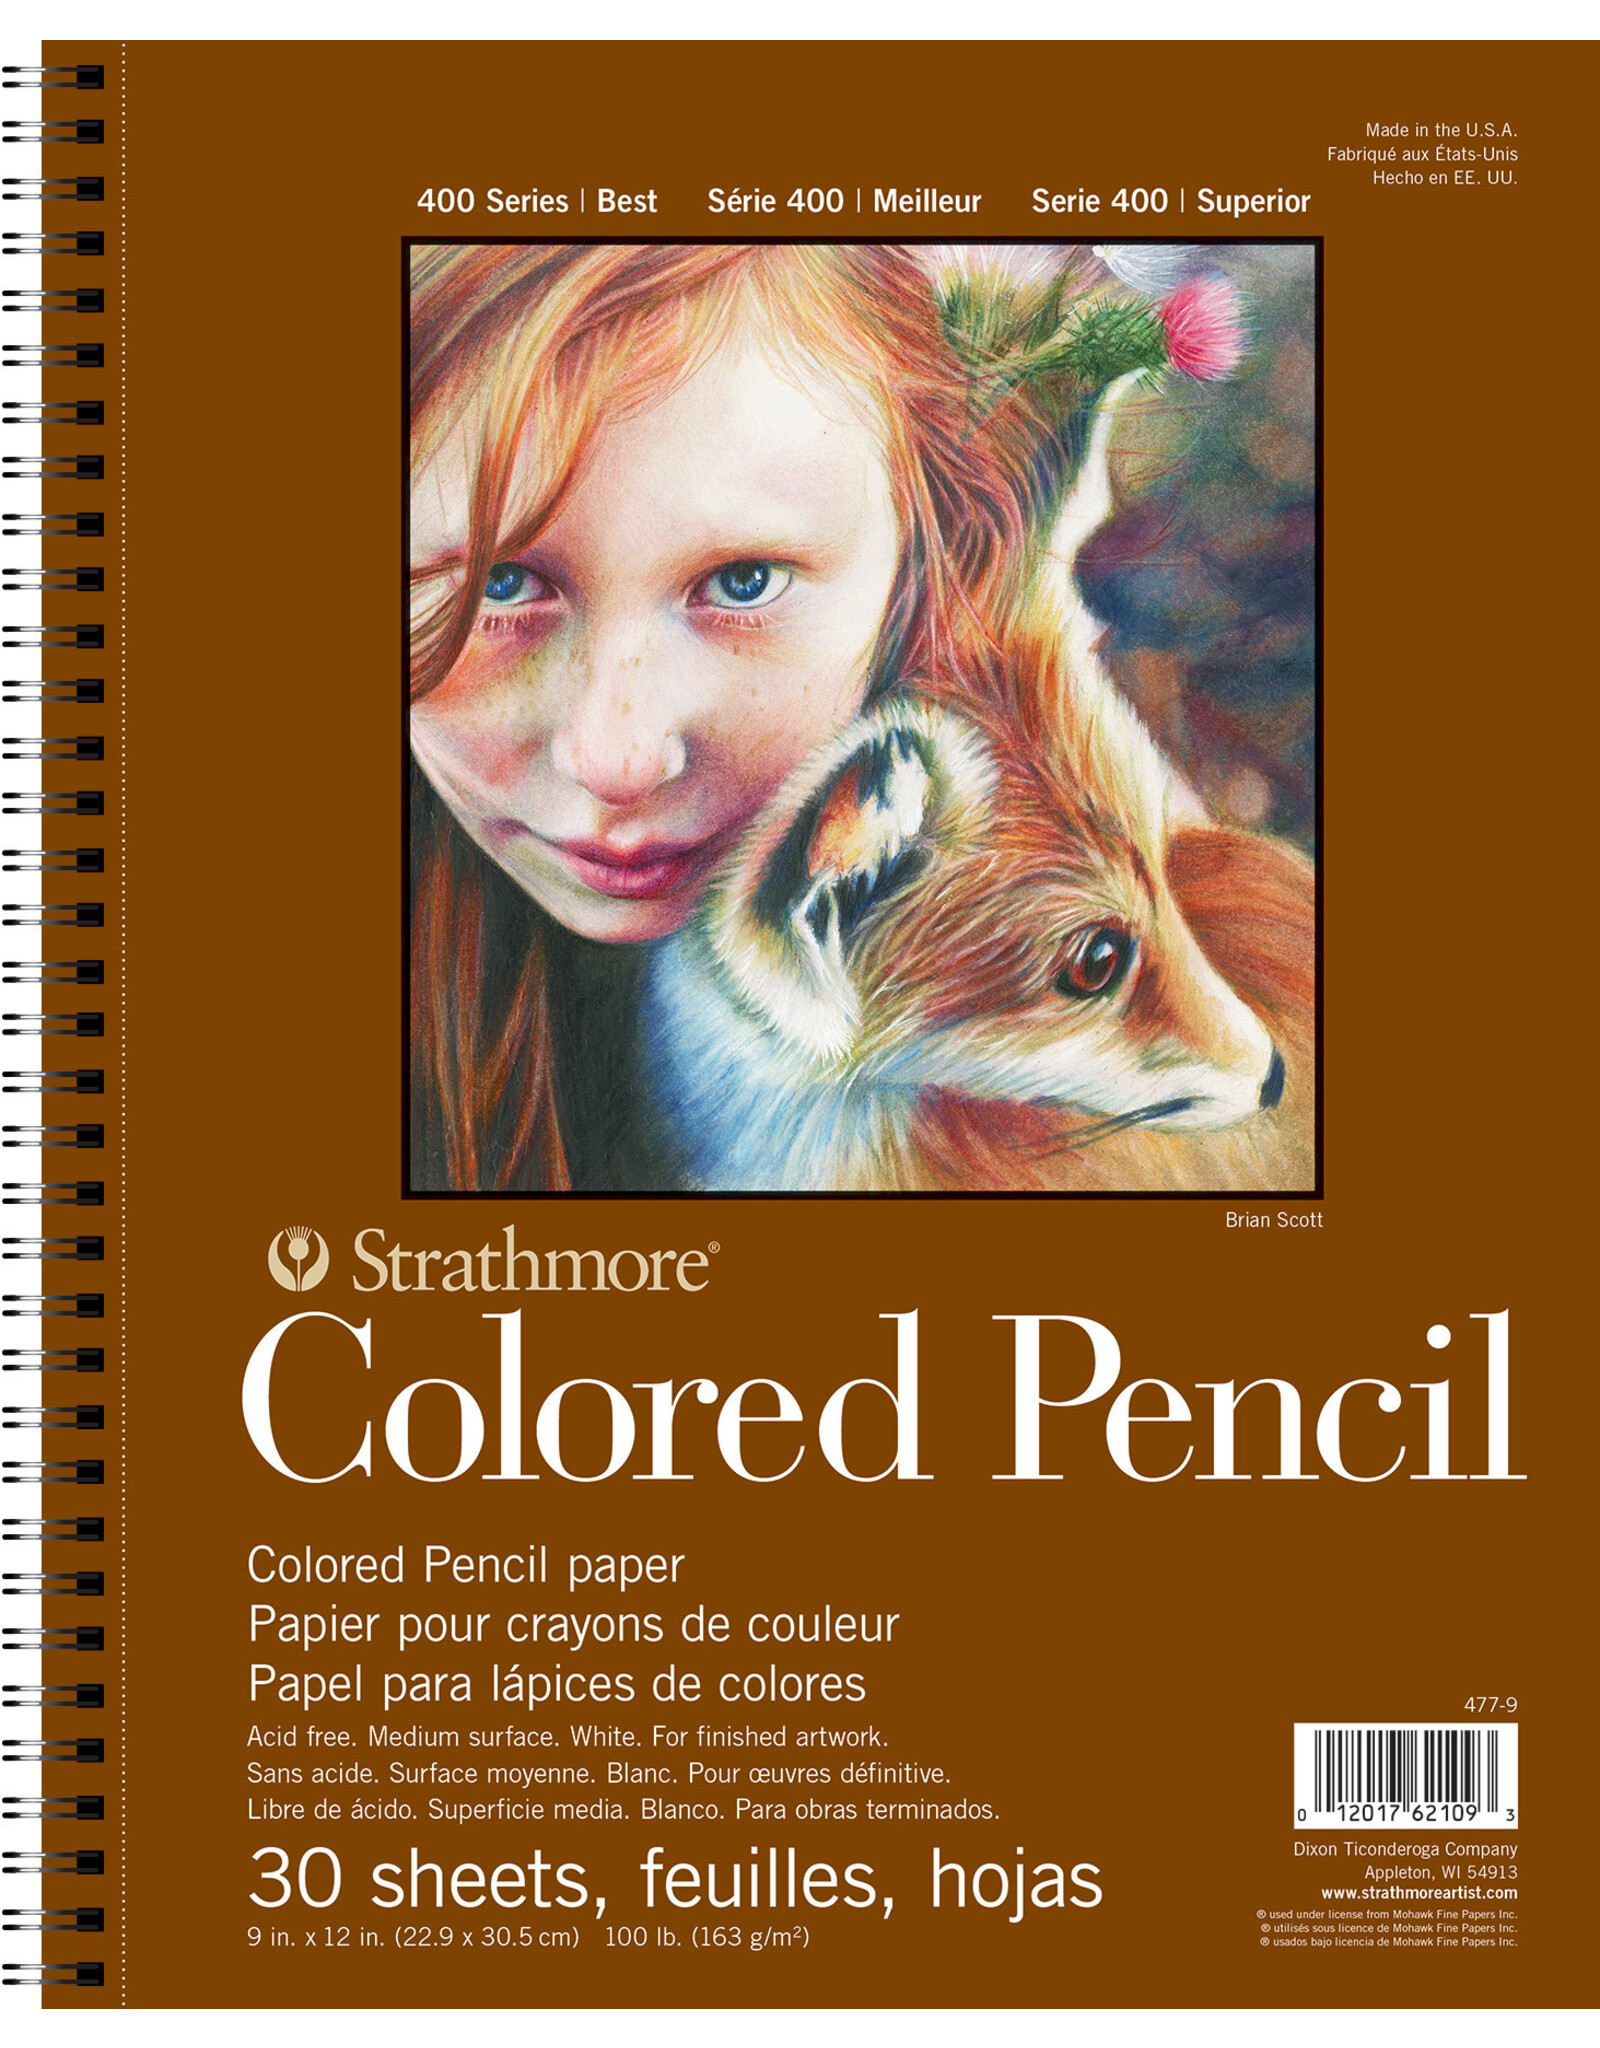 Strathmore Strathmore 400 Series Colored Pencil Pad, 30 Sheets, 9” x 12”